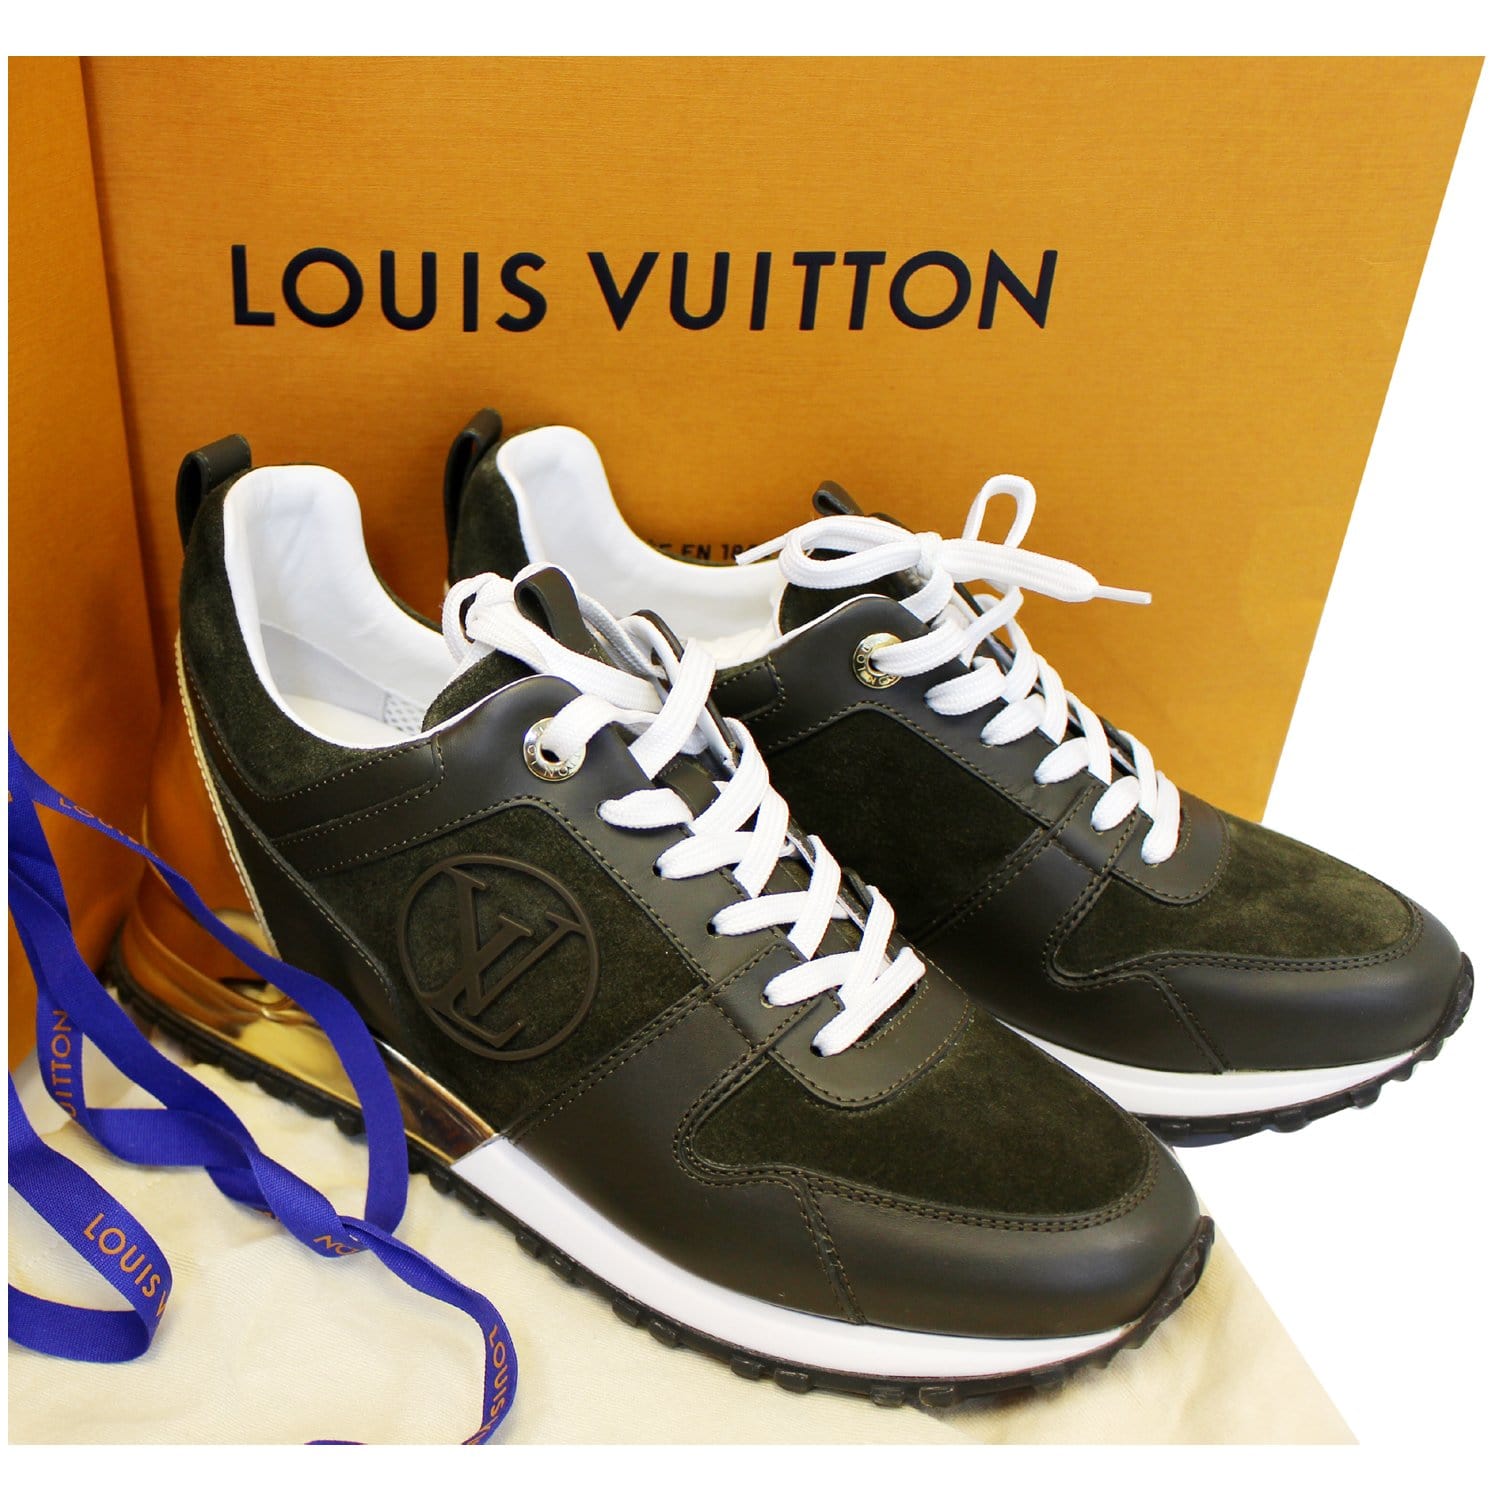 Louis Vuitton, Shoes, Authentic Louis Vuitton Runaway Leather Sneakers